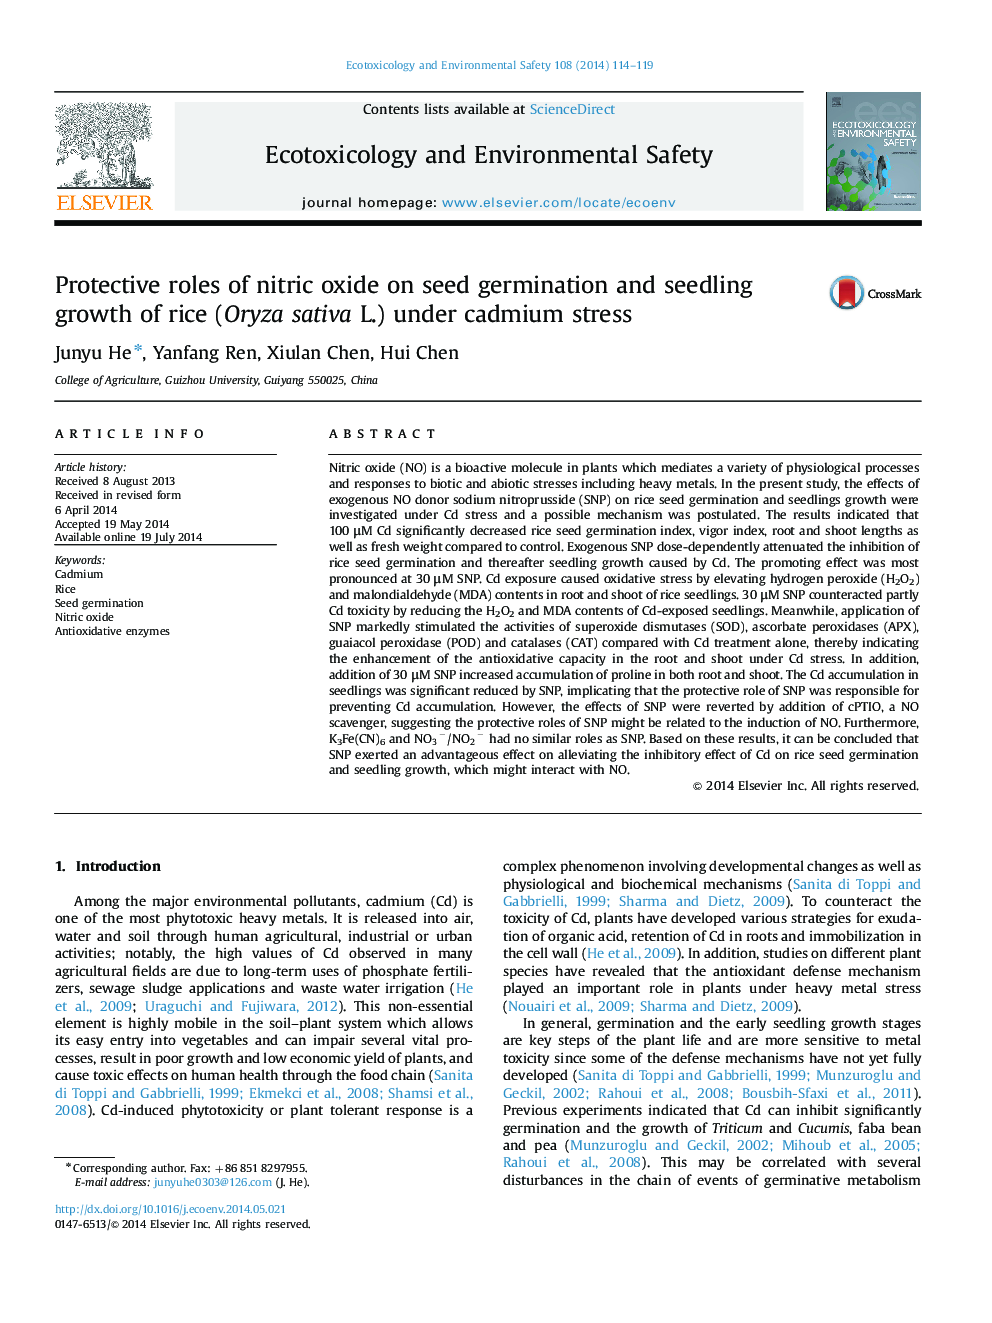 Protective roles of nitric oxide on seed germination and seedling growth of rice (Oryza sativa L.) under cadmium stress